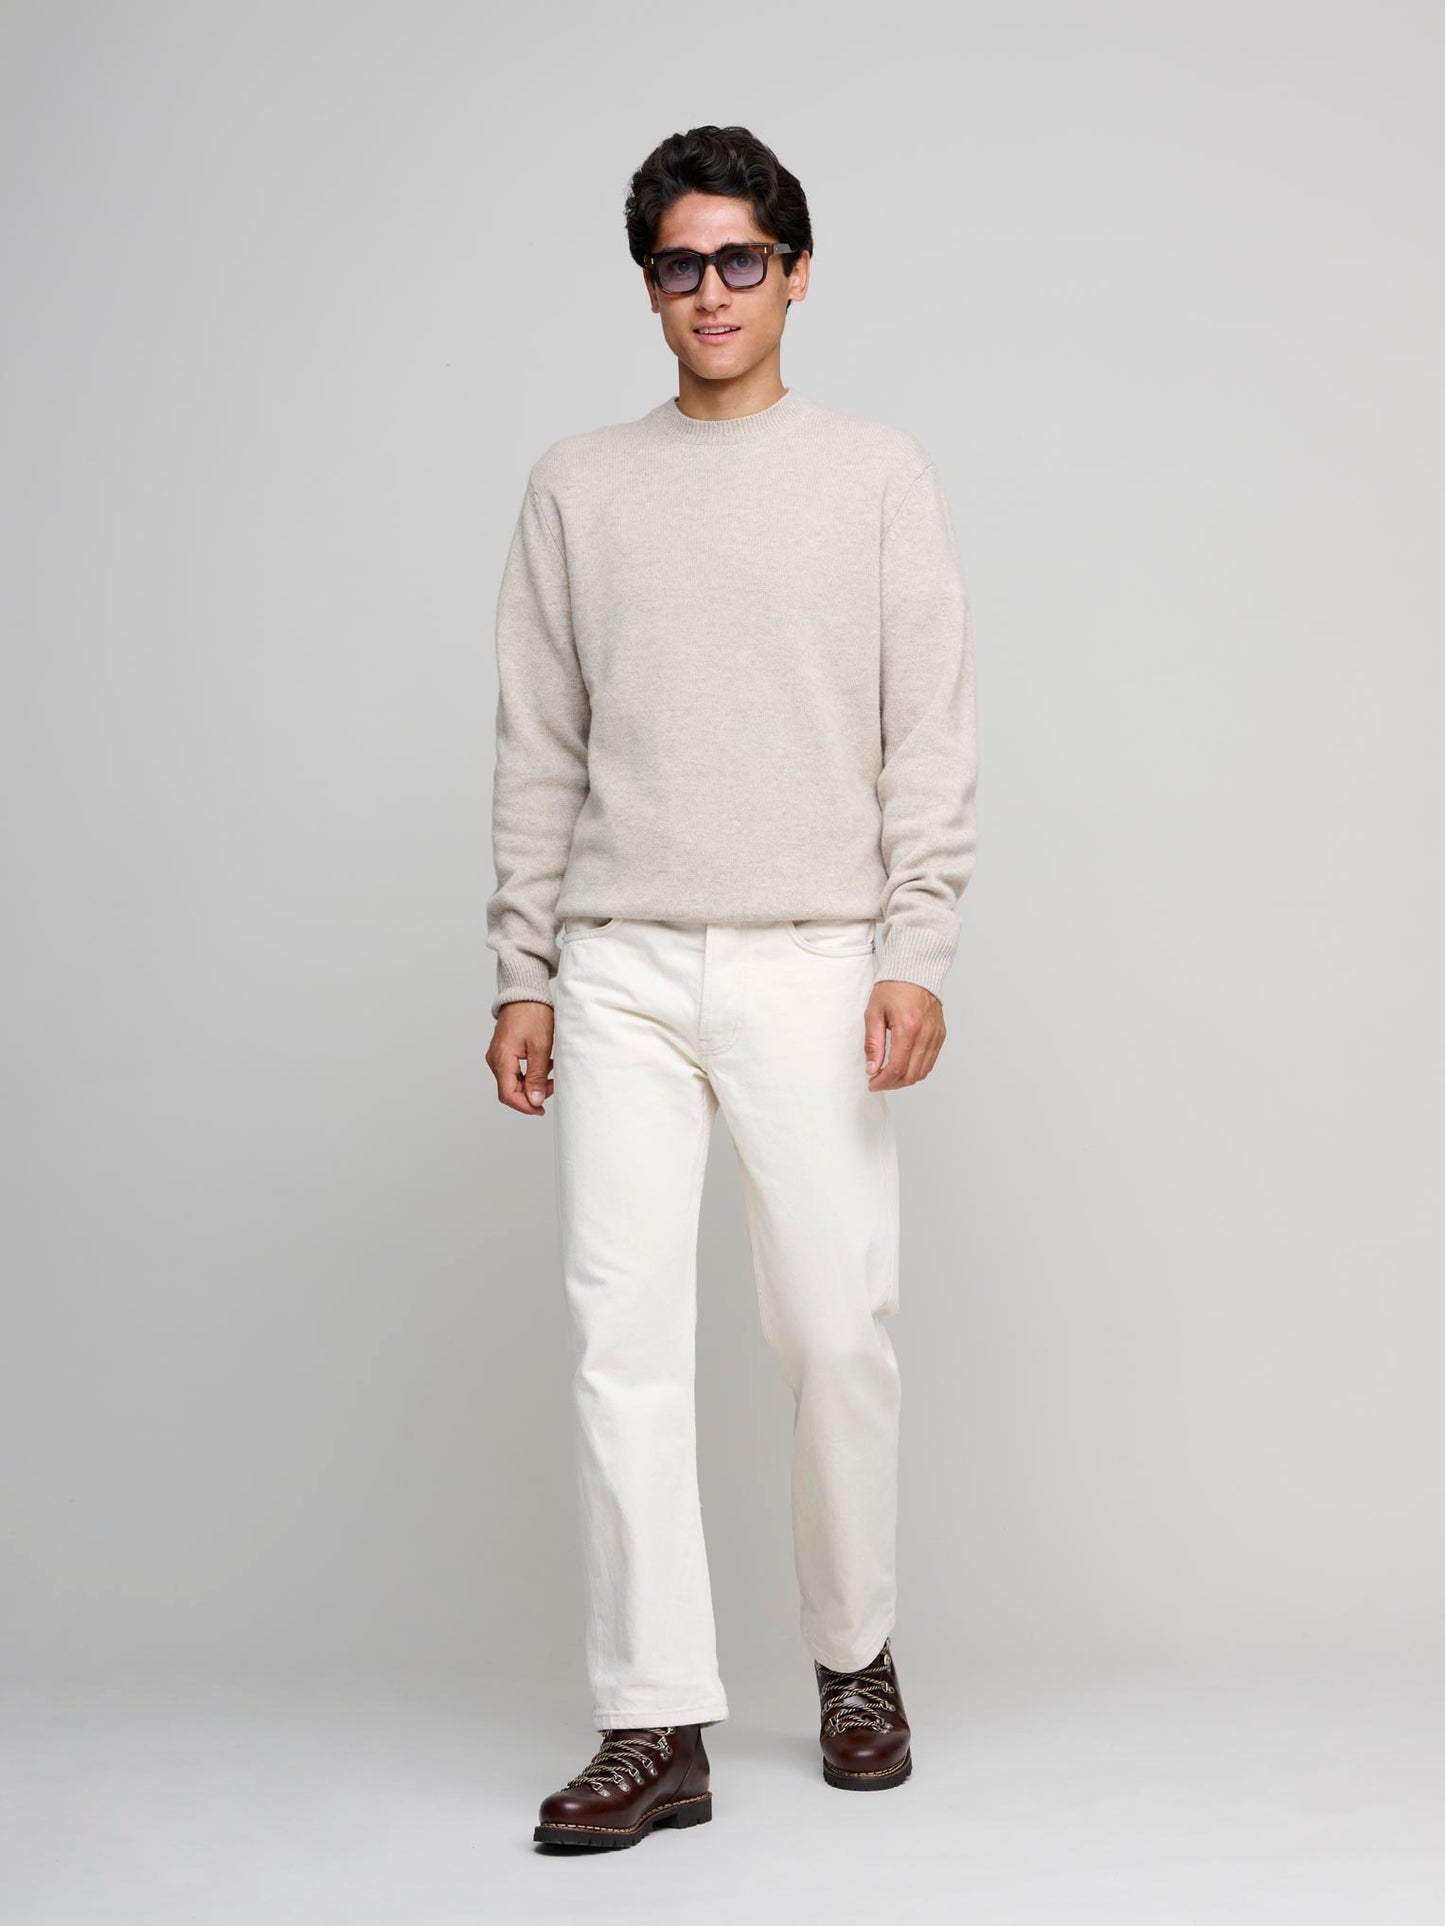 Cashmere/Lambswool Crew, Oatmeal – Goods